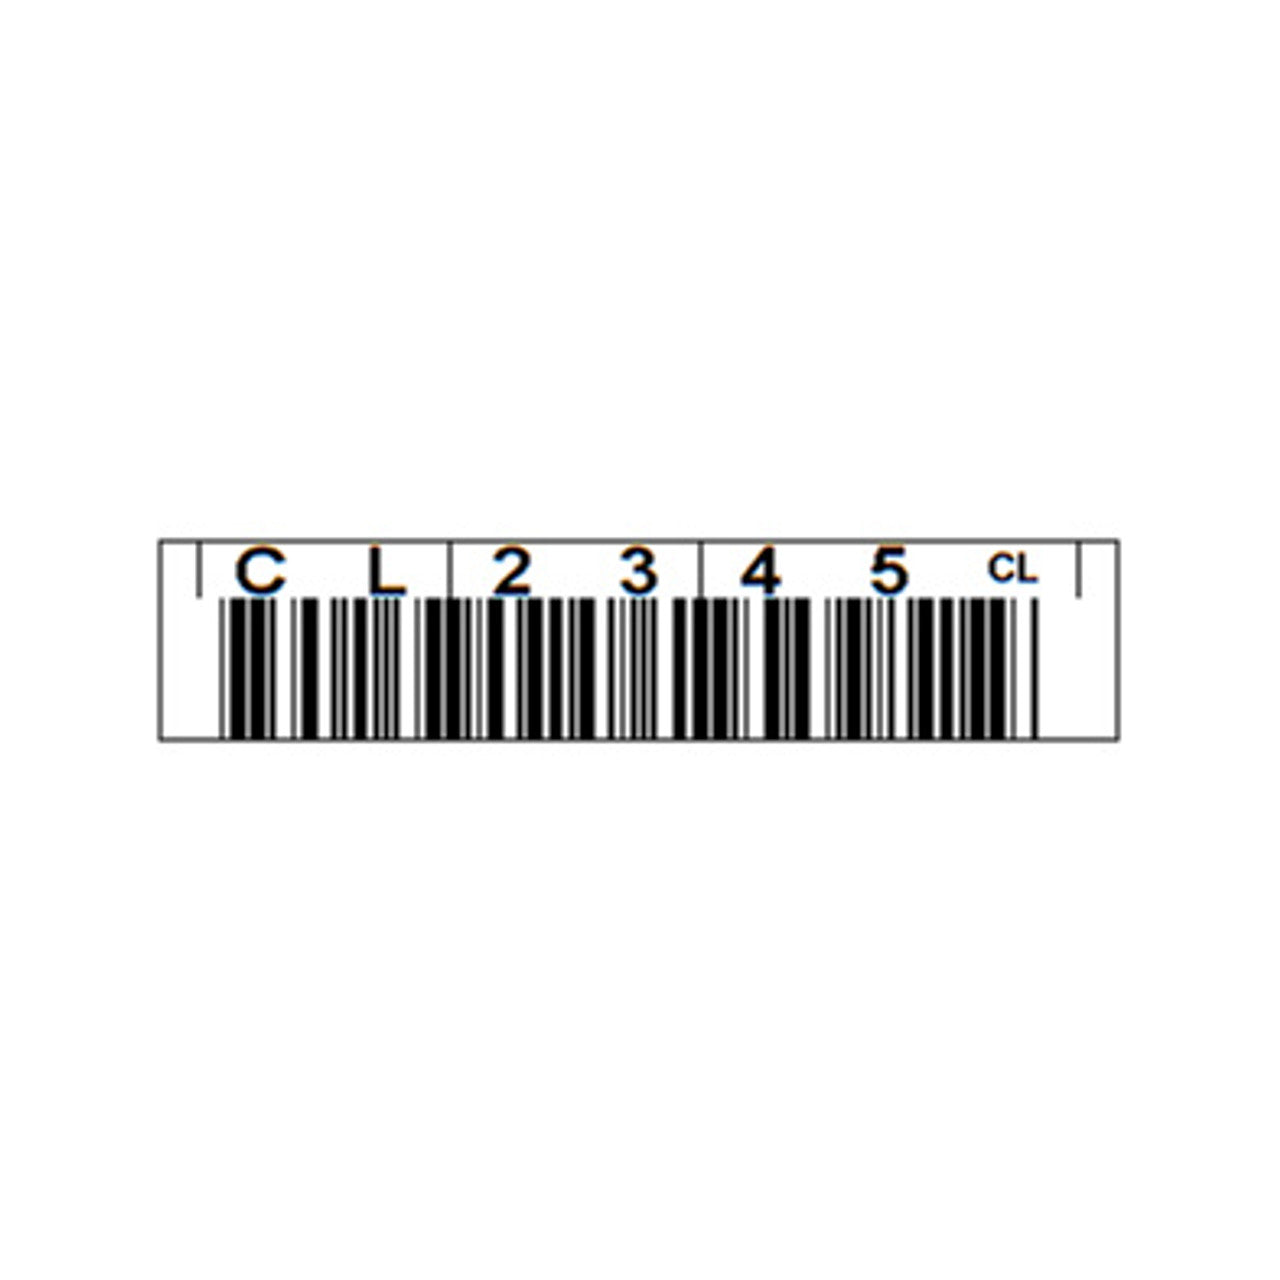 LTO_Barcode Labels for LTO Cleaning Tapes (Add Label Details in comments box below)